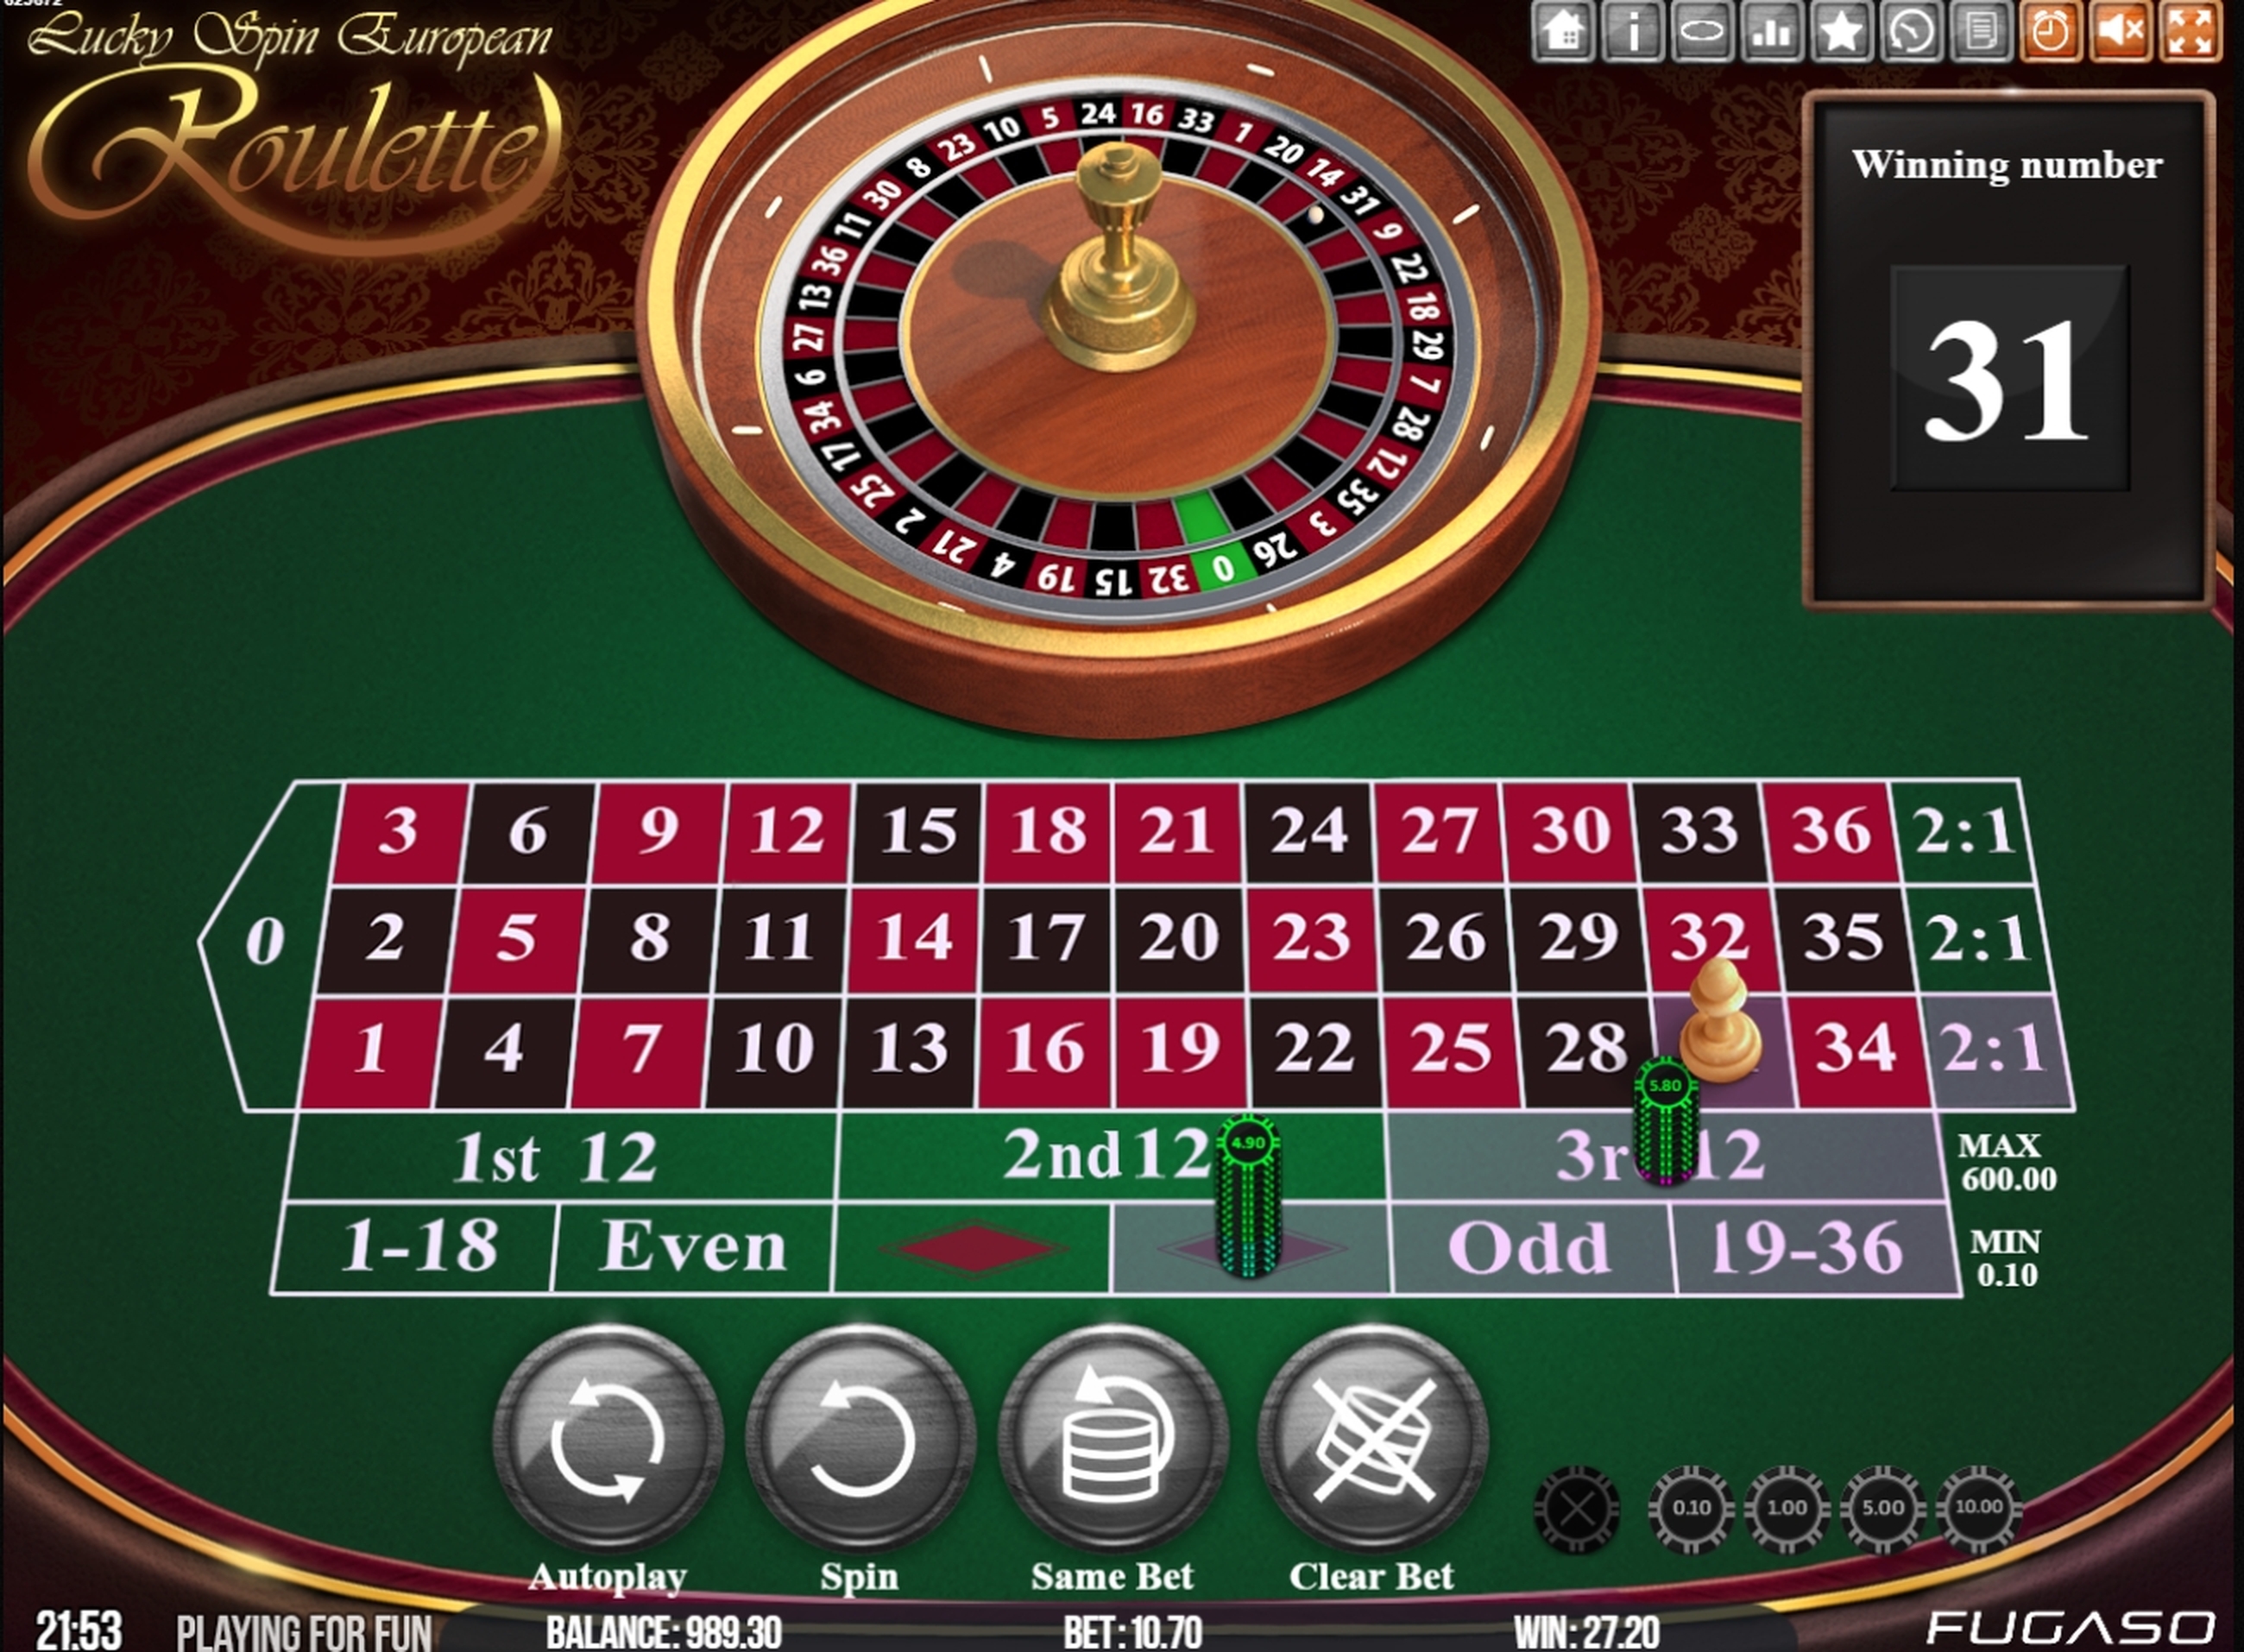 Win Money in Lucky Spin European Roulette Free Slot Game by Fugaso